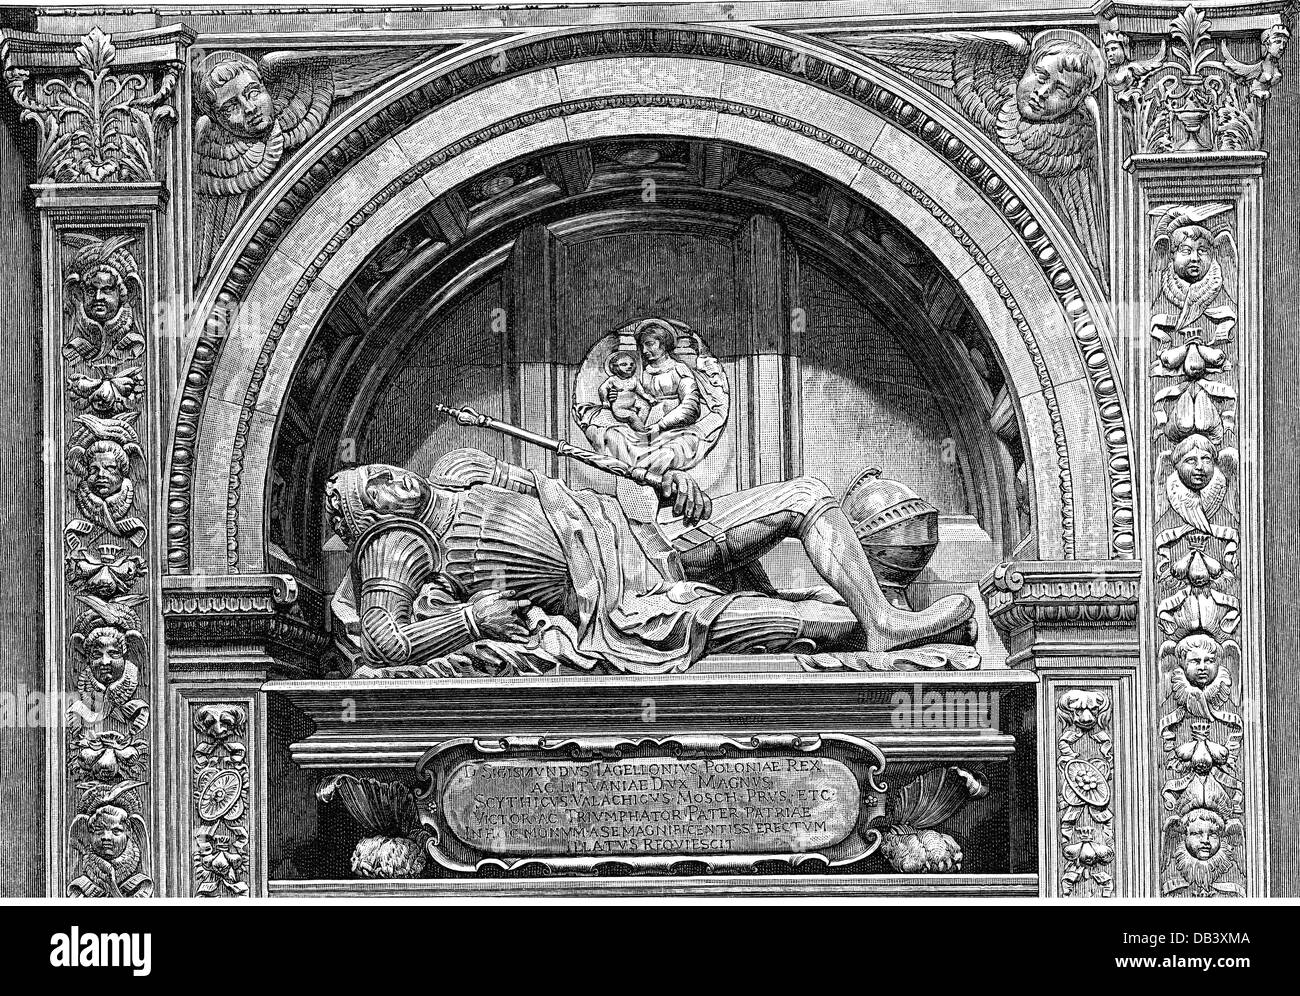 Sigismund I 'the Old',1466 - 1.4.1548, King of Poland 19.8.1507 - 1.4.1544, grave, cathedral of Krakow, wood engraving, 19th century, Stock Photo